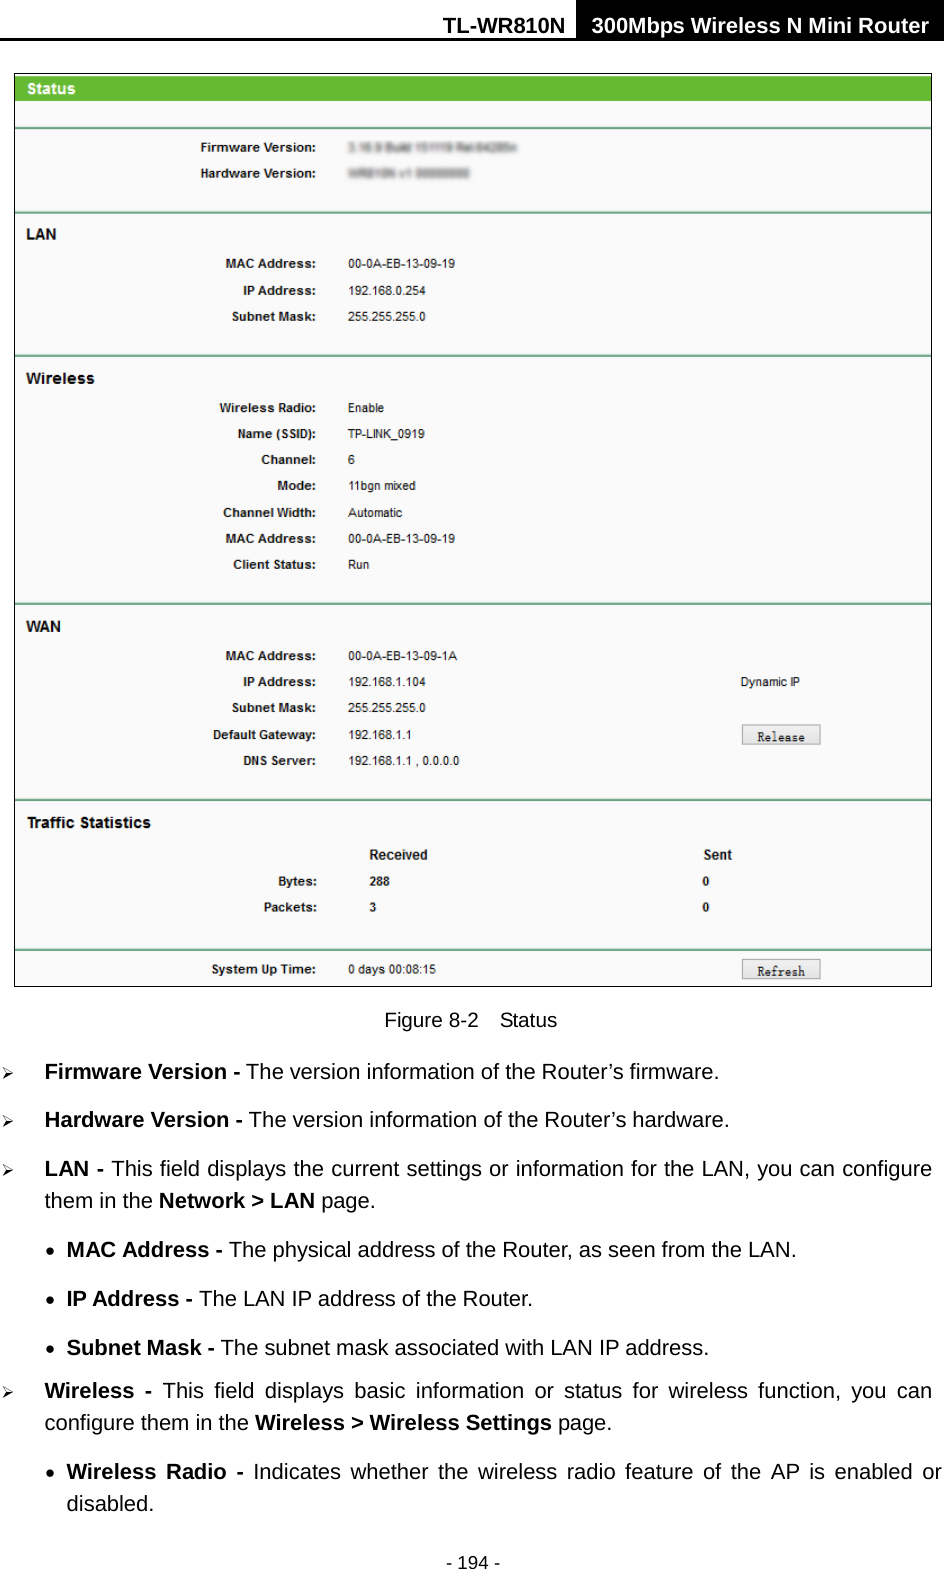 TL-WR810N 300Mbps Wireless N Mini Router  - 194 -  Figure 8-2  Status  Firmware Version - The version information of the Router’s firmware.  Hardware Version - The version information of the Router’s hardware.  LAN - This field displays the current settings or information for the LAN, you can configure them in the Network &gt; LAN page.   • MAC Address - The physical address of the Router, as seen from the LAN. • IP Address - The LAN IP address of the Router. • Subnet Mask - The subnet mask associated with LAN IP address.  Wireless -  This field displays basic information or status for wireless function, you can configure them in the Wireless &gt; Wireless Settings page.   • Wireless Radio - Indicates whether the wireless radio feature of the AP is enabled or disabled. 